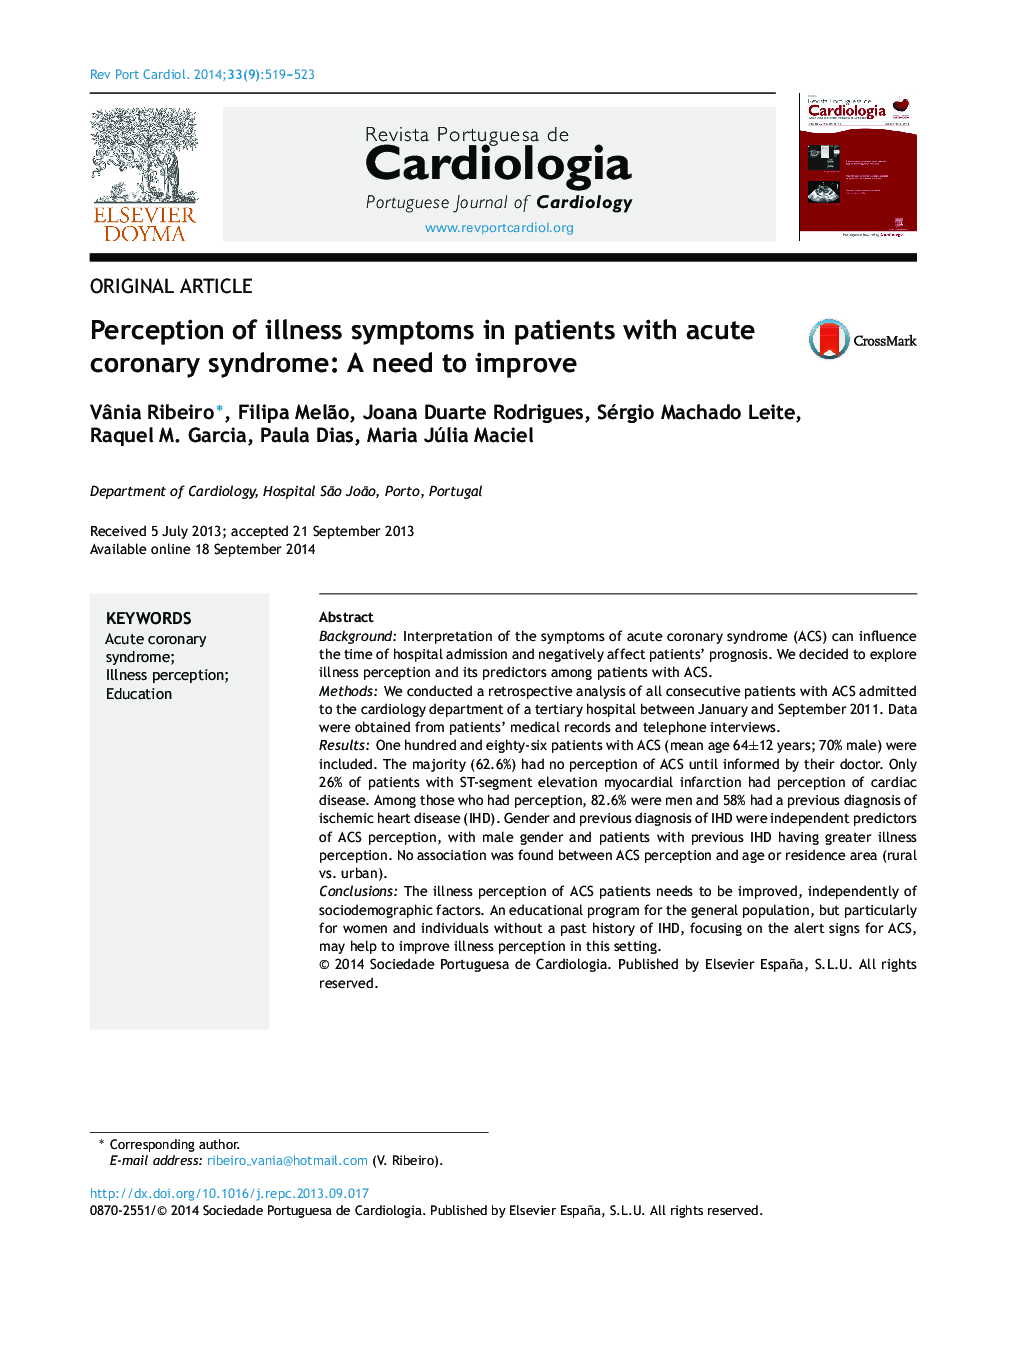 Perception of illness symptoms in patients with acute coronary syndrome: A need to improve